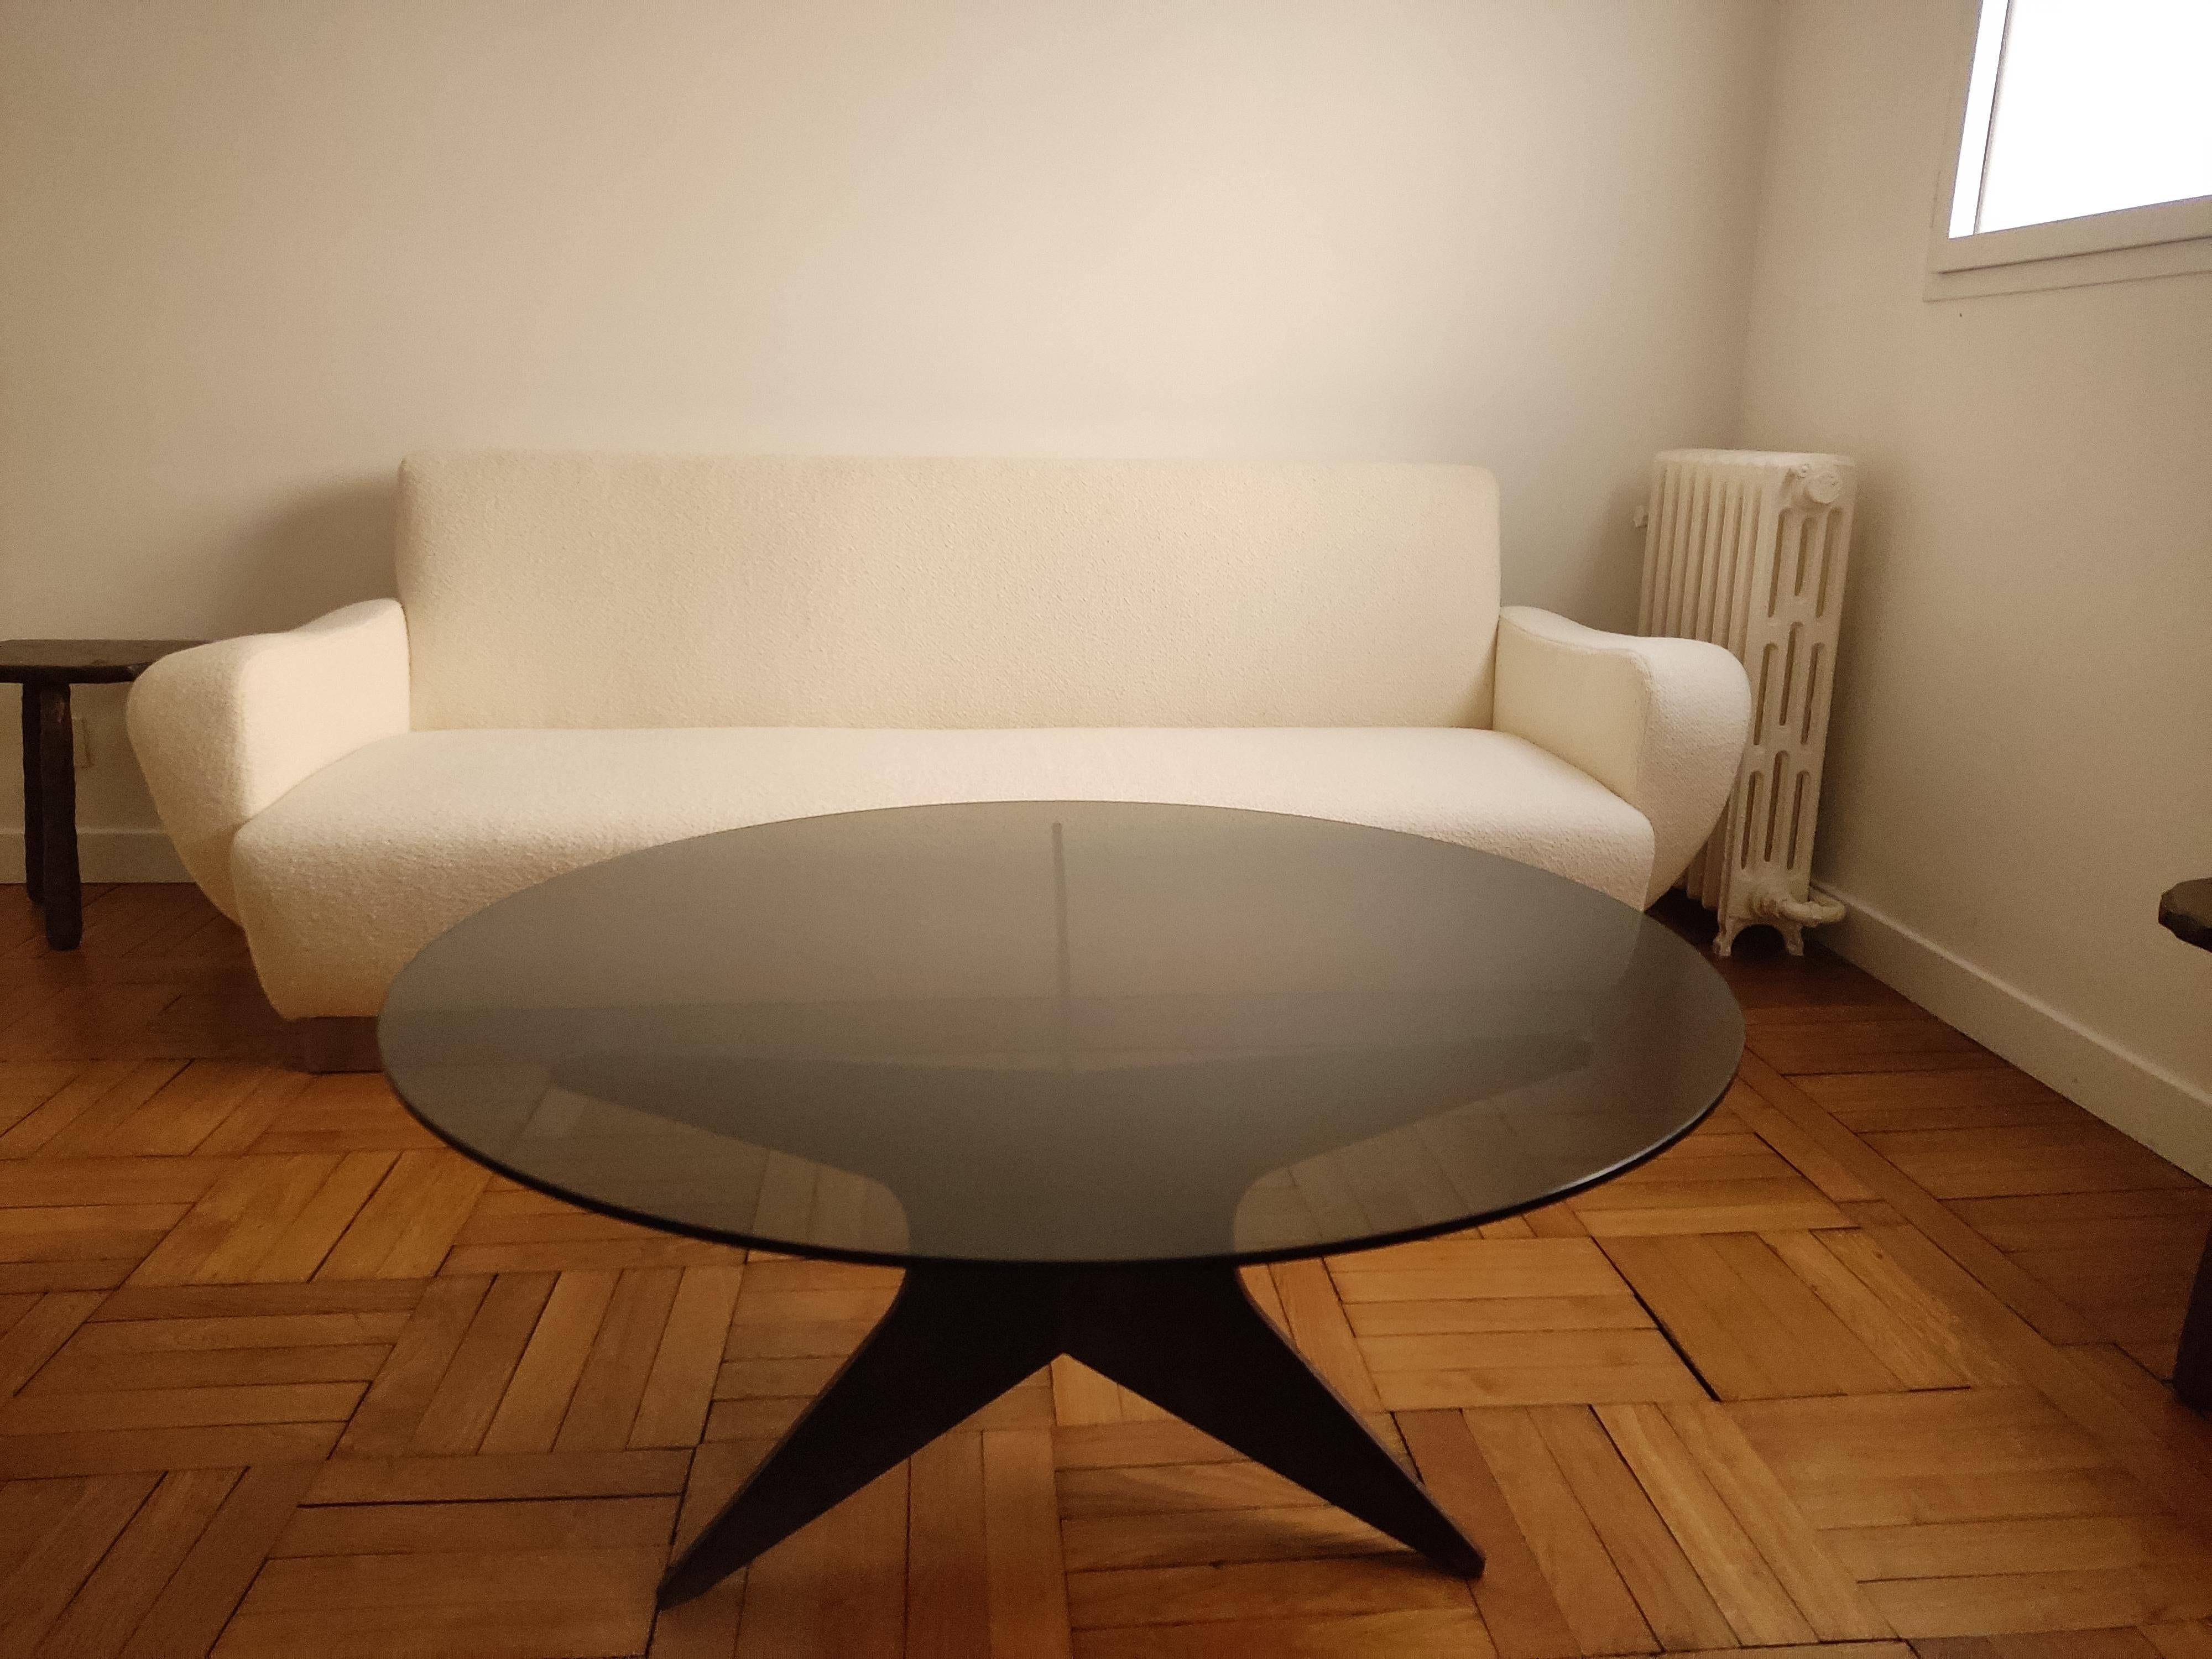 1960s coffee table composed of a star-shaped base in cloudy patinated iron and a smoked circular glass top.